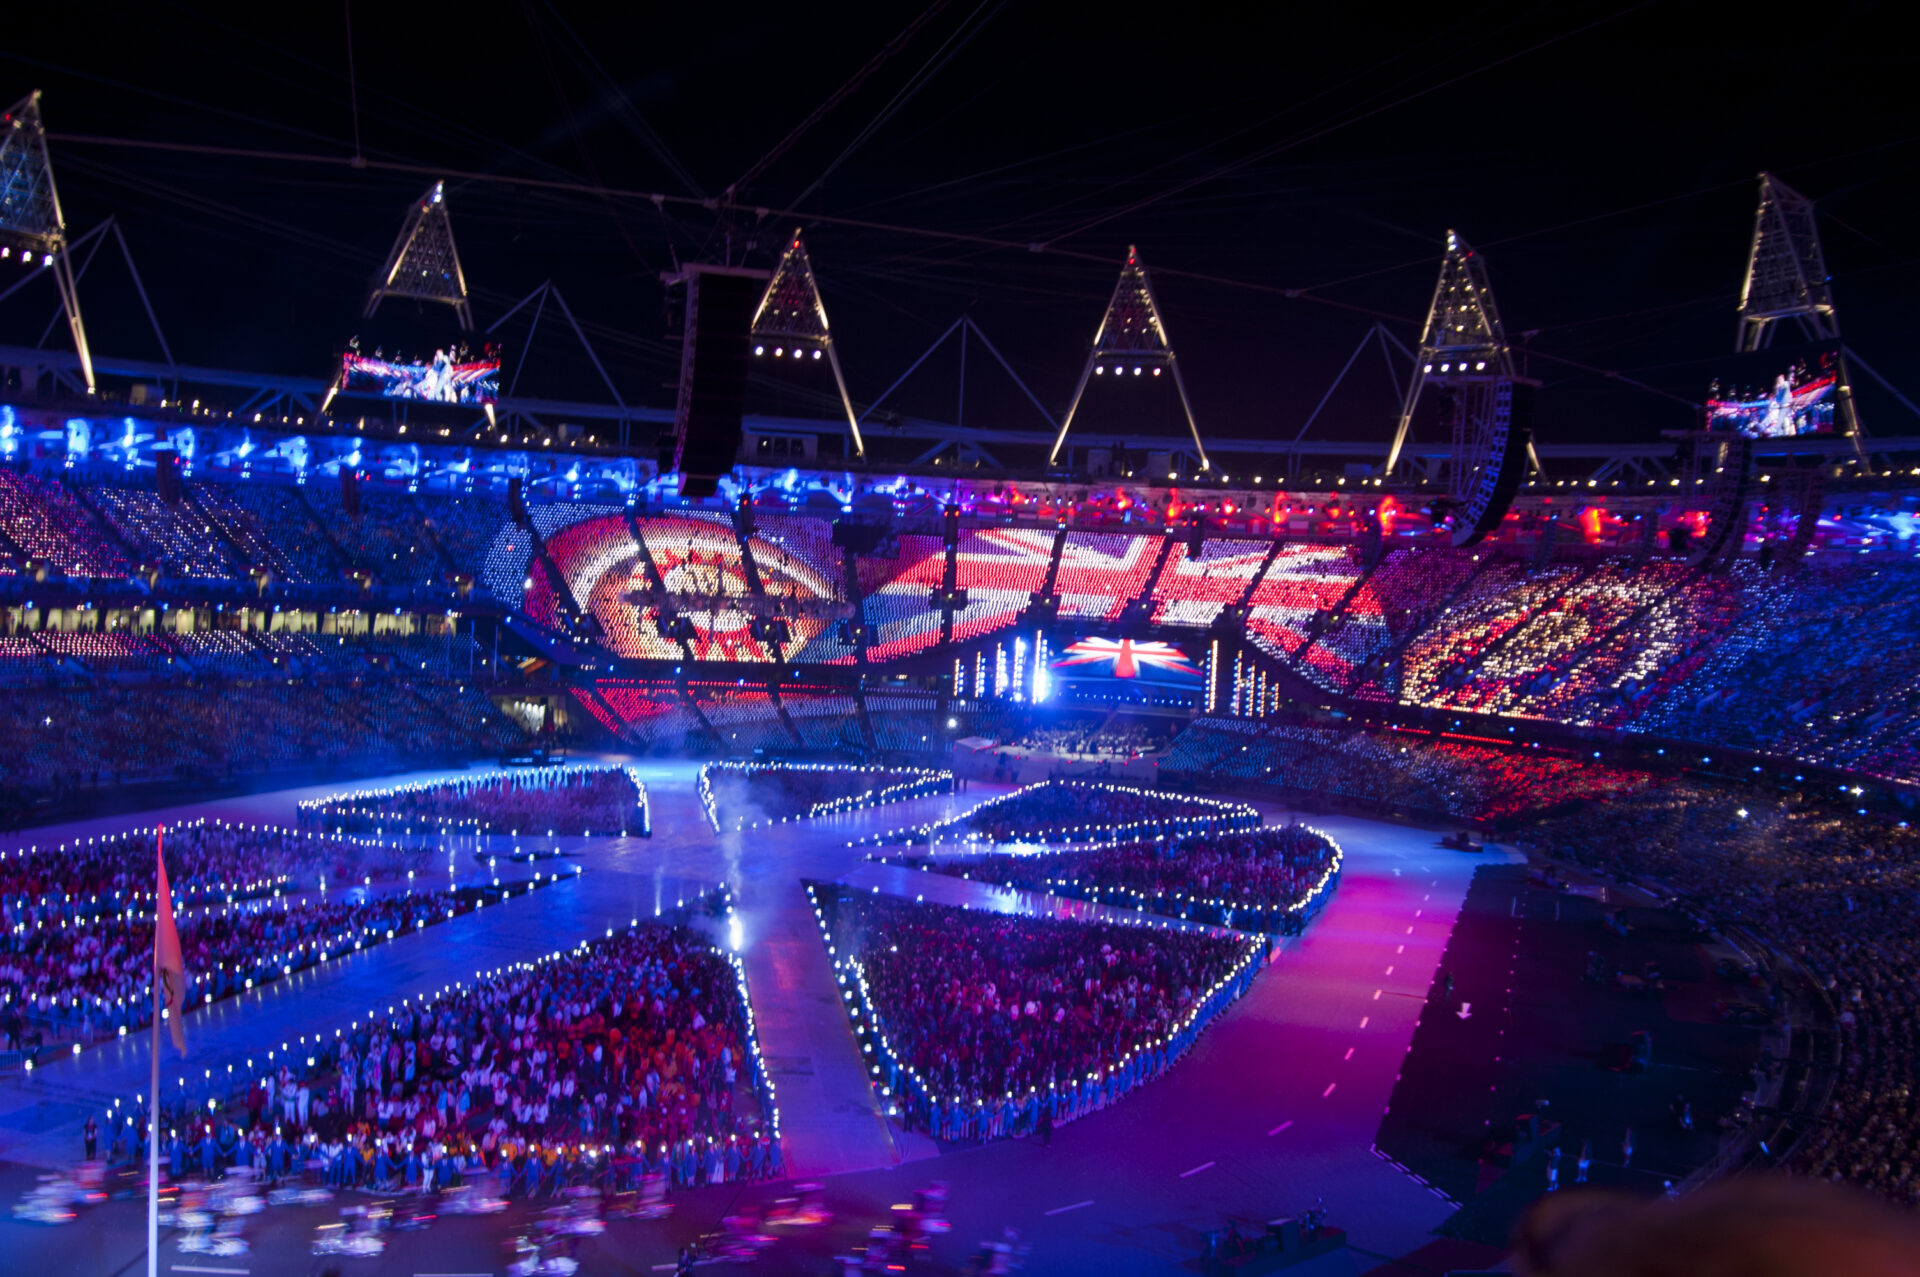 Pixels lighting effect at the London Olympics 2012 (Photo: Philip Pryke CC-BY-2.0)